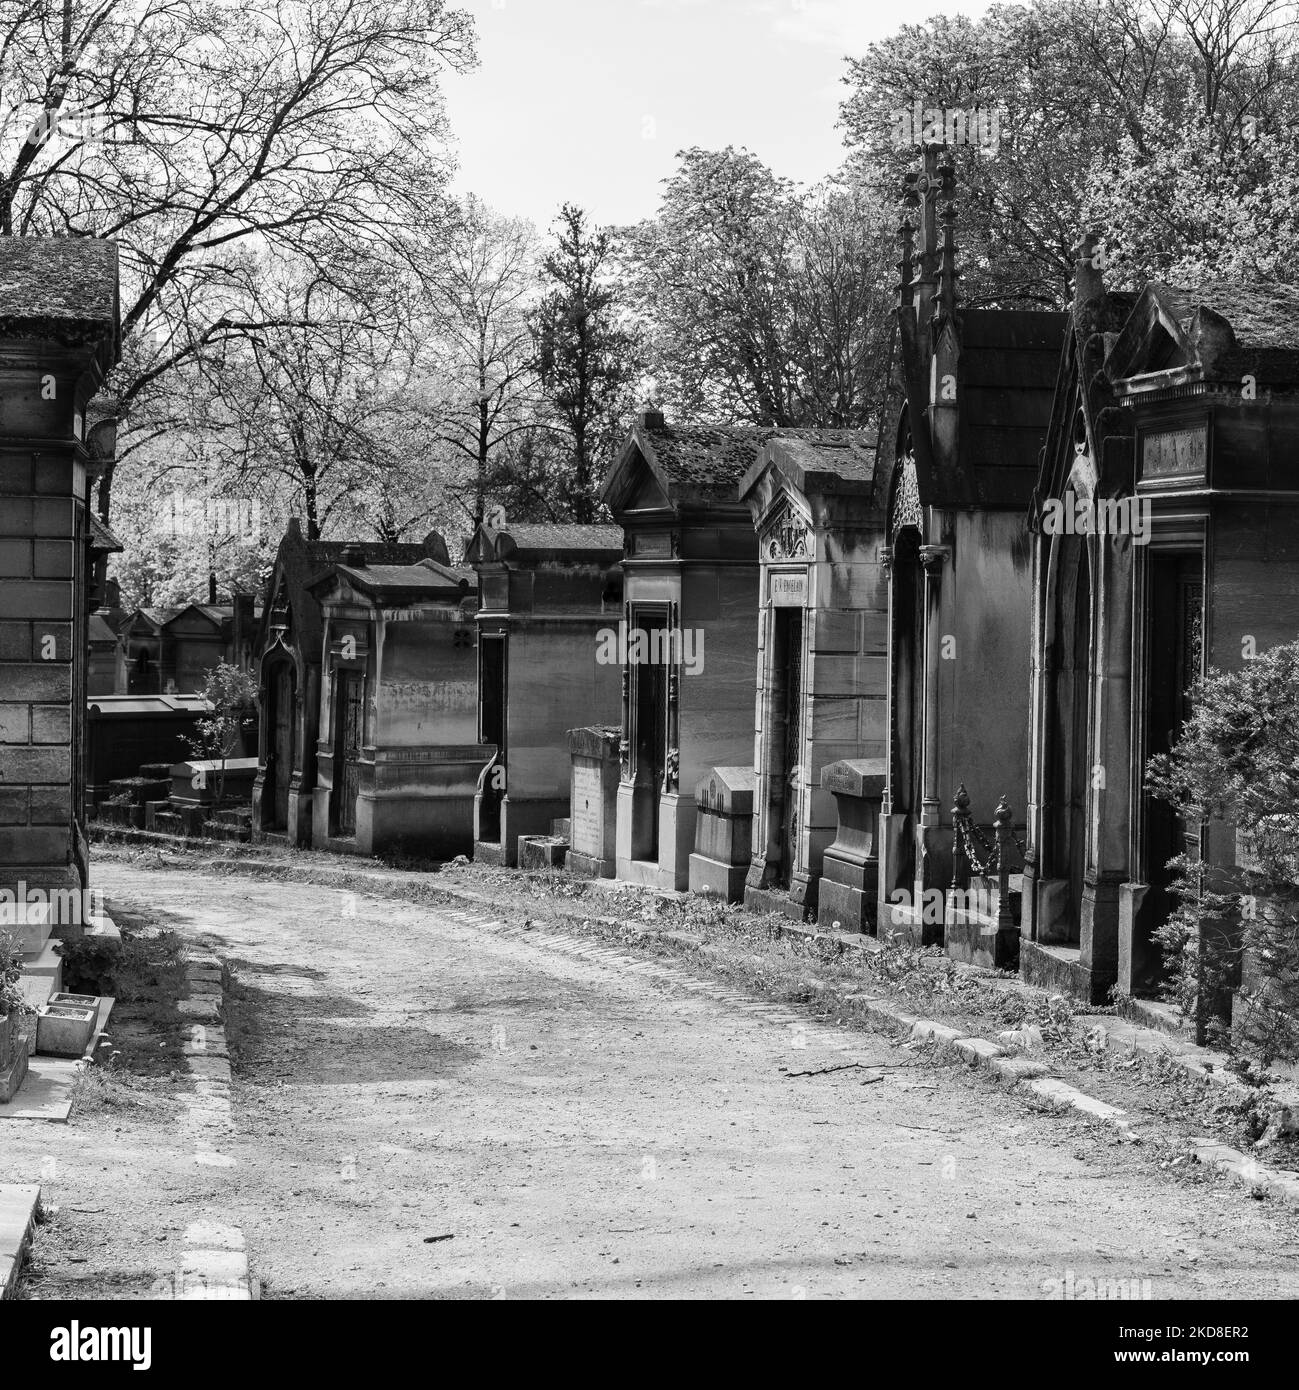 The largest Pere Lachaise cemetery in Paris, and one of the most famous in the world. It is located in the xx arrondissement. The one designed by the neoclassical architect Alexandre Theodore Brongniart in 1803. (Photo by Oscar Gonzalez/NurPhoto) Stock Photo